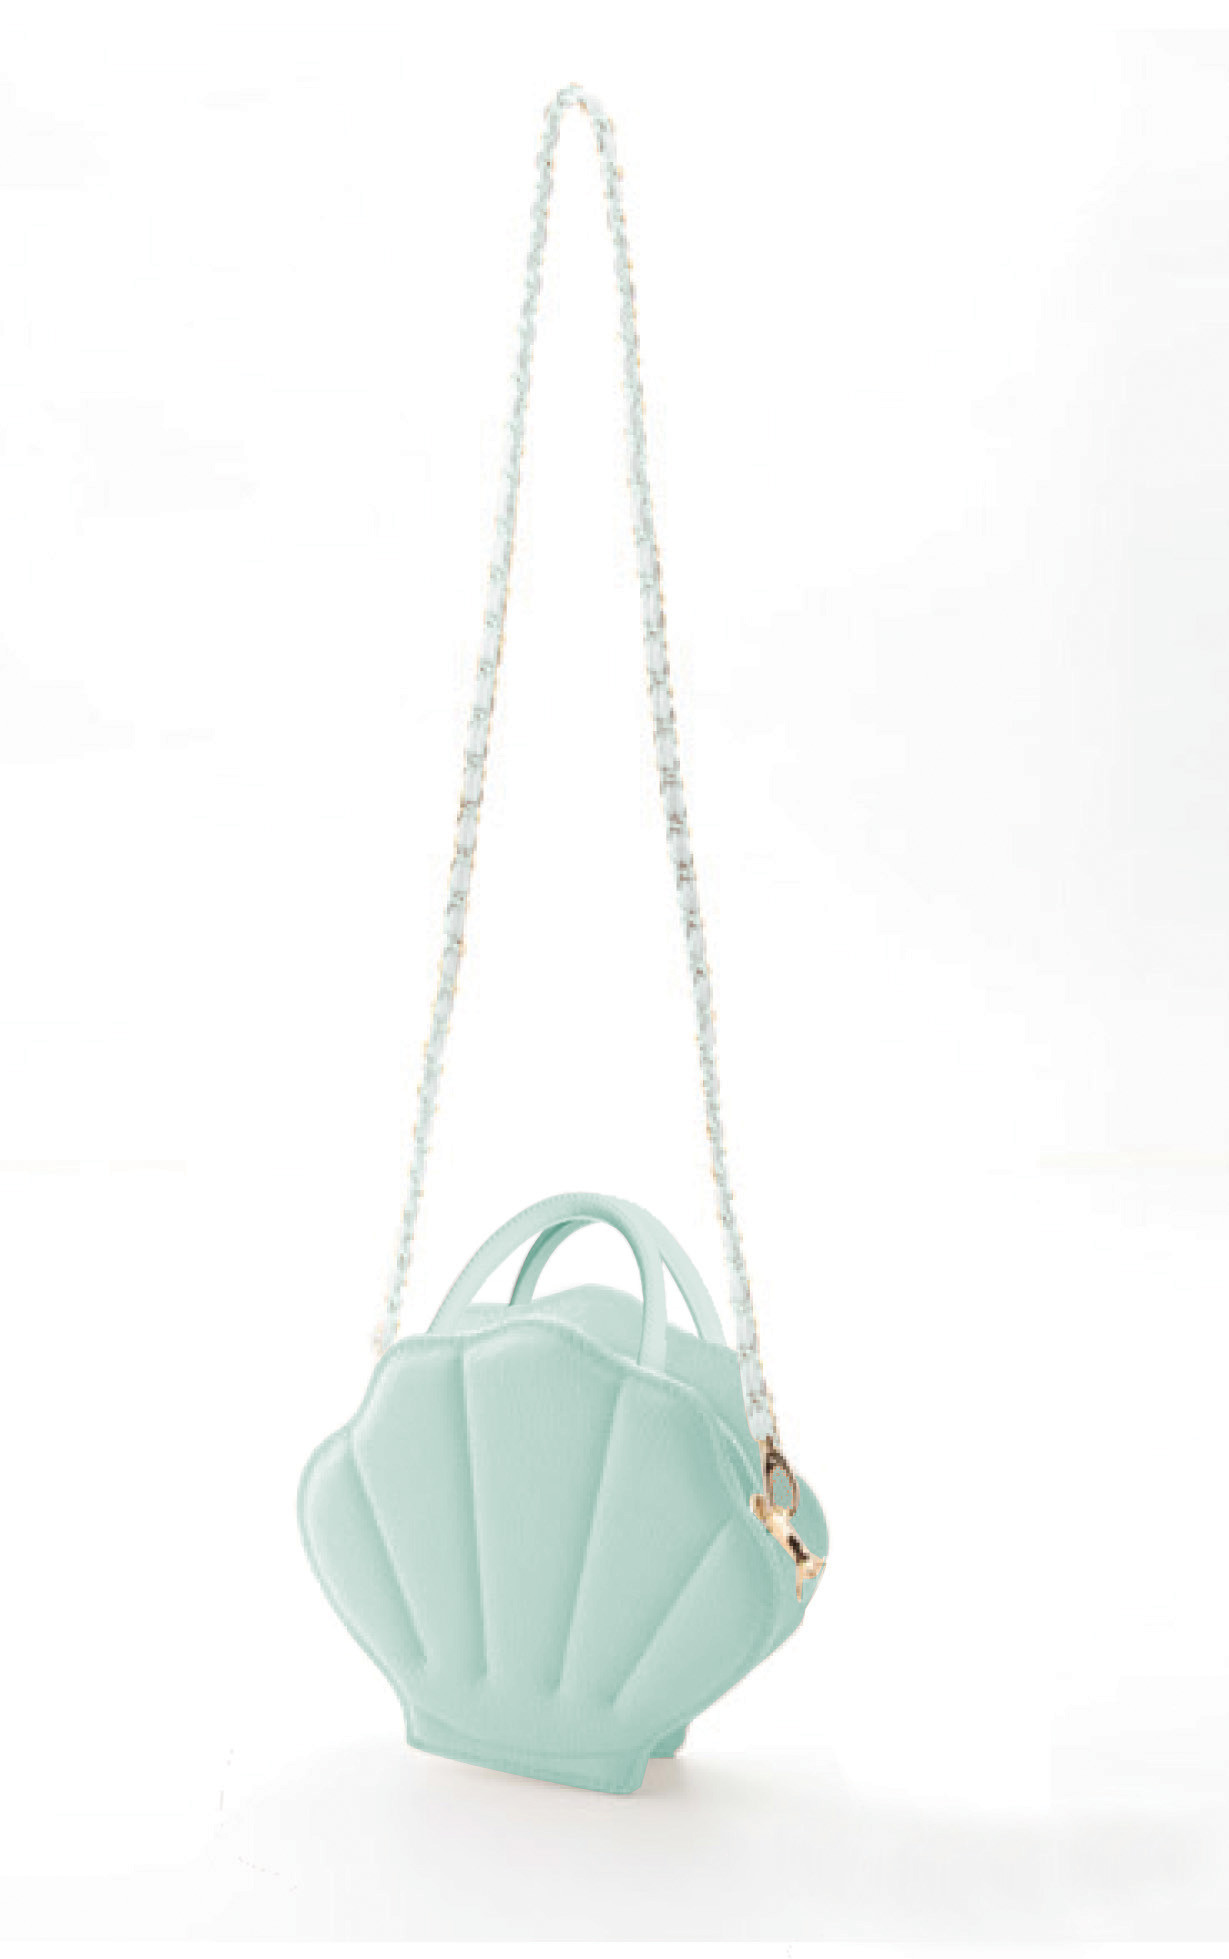 Mermaid Whimsy Sea Shell Purse in Mint Green | Sincerely Sweet Boutique